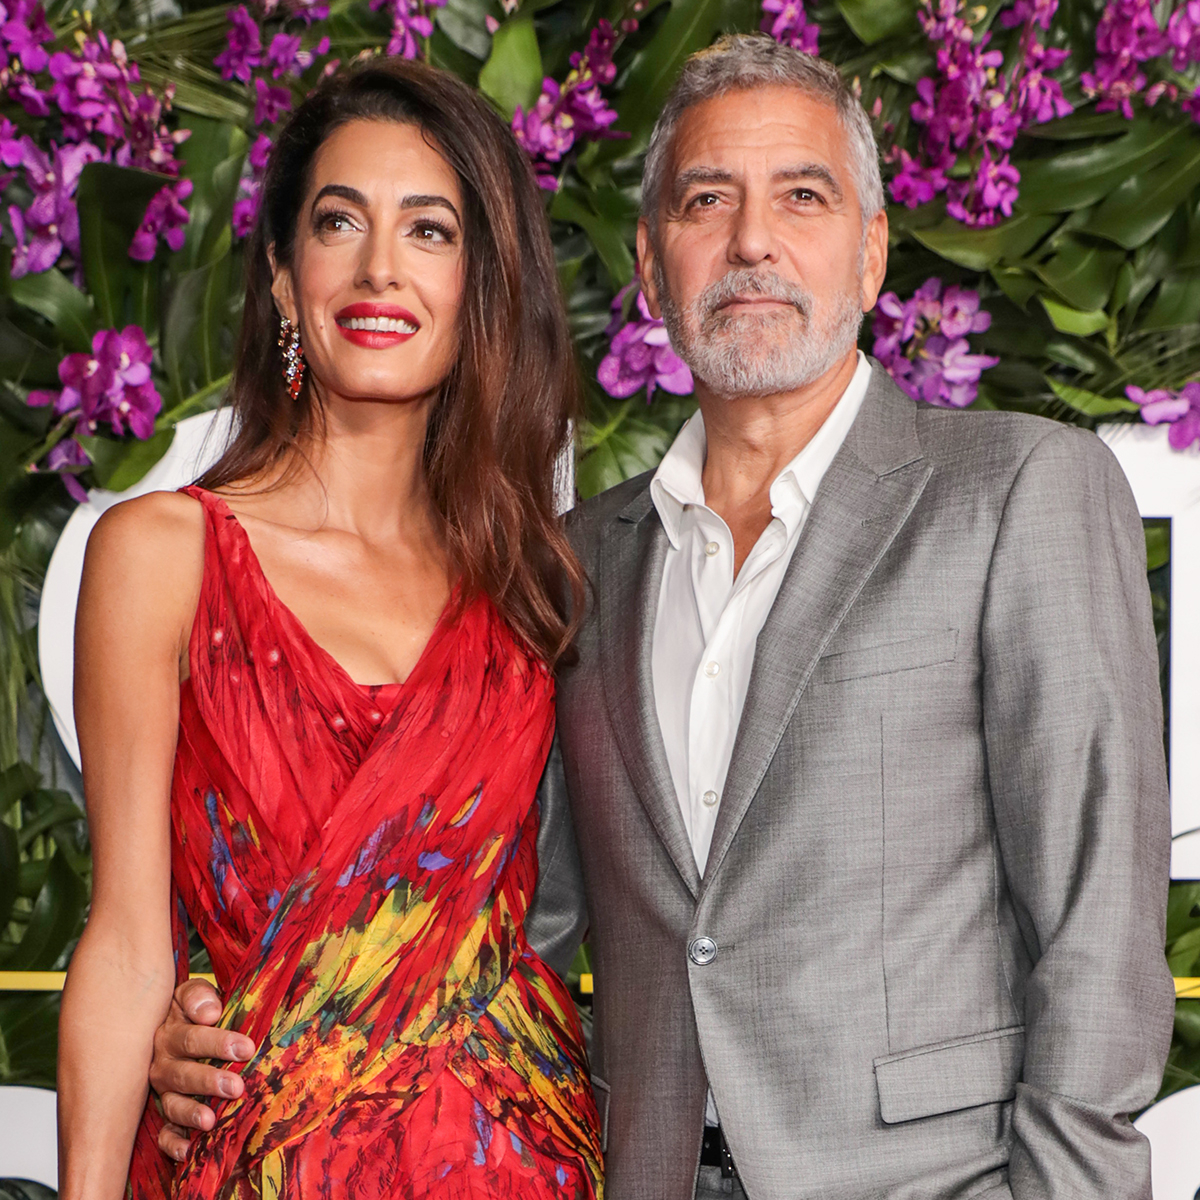 George Clooney Recalls His “Disaster” Proposal to Wife Amal